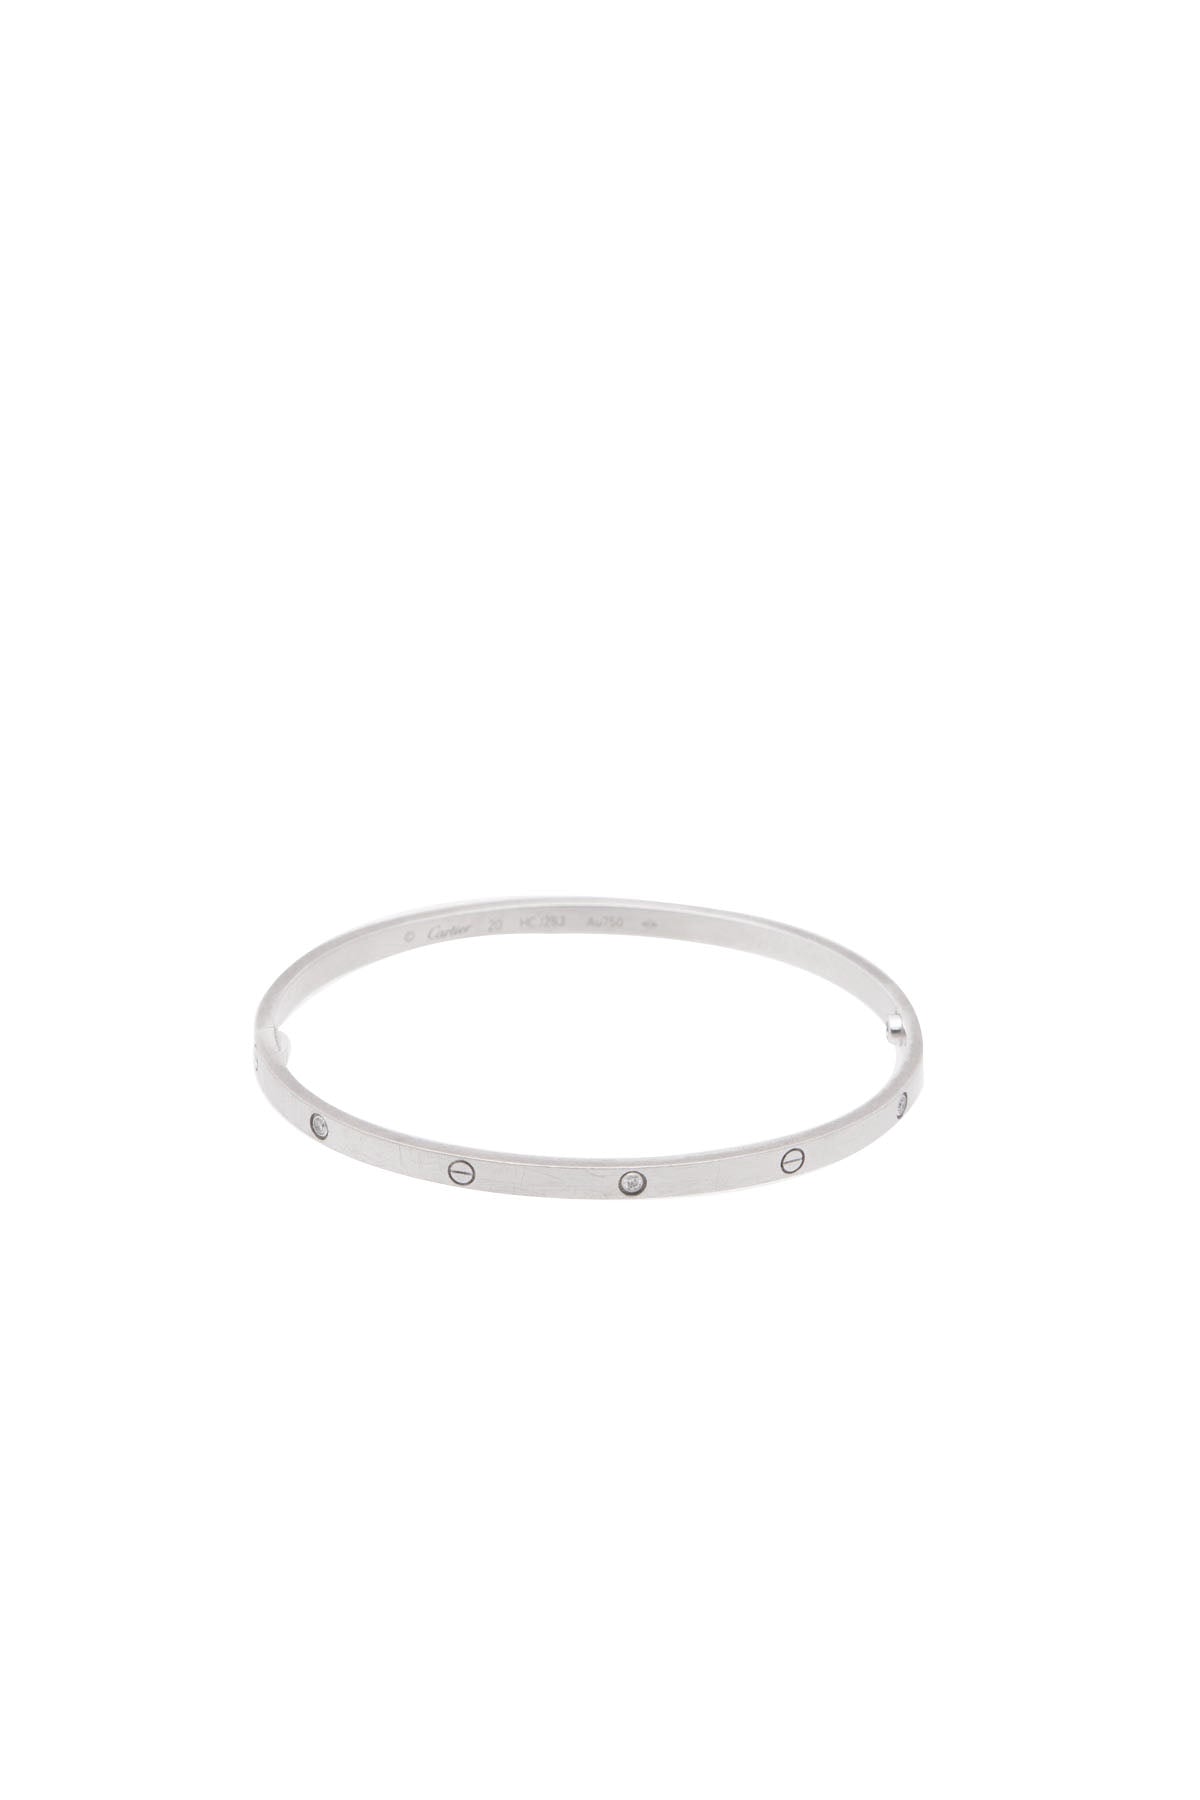 40.0% OFF on KATE SPADE NEW YORK PEARLS ON PEARLS HINGED BANGLE KC253 CREAM/ SILVER